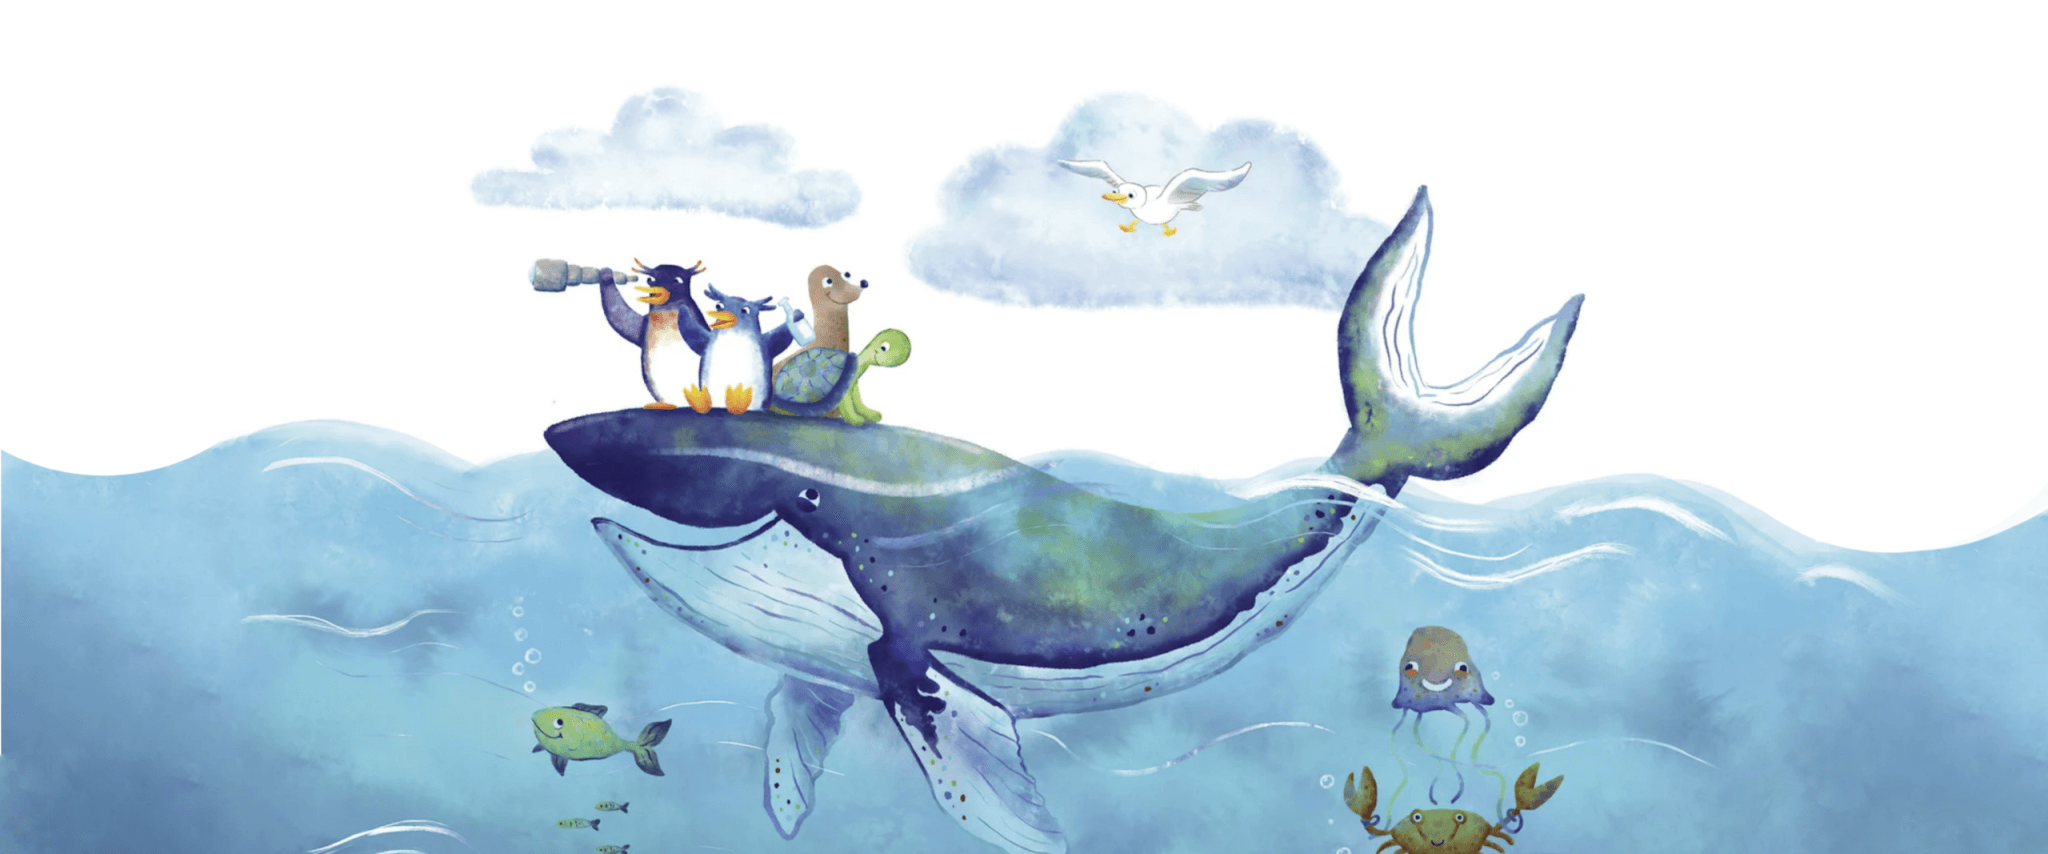 An illustration of penguins on a whale